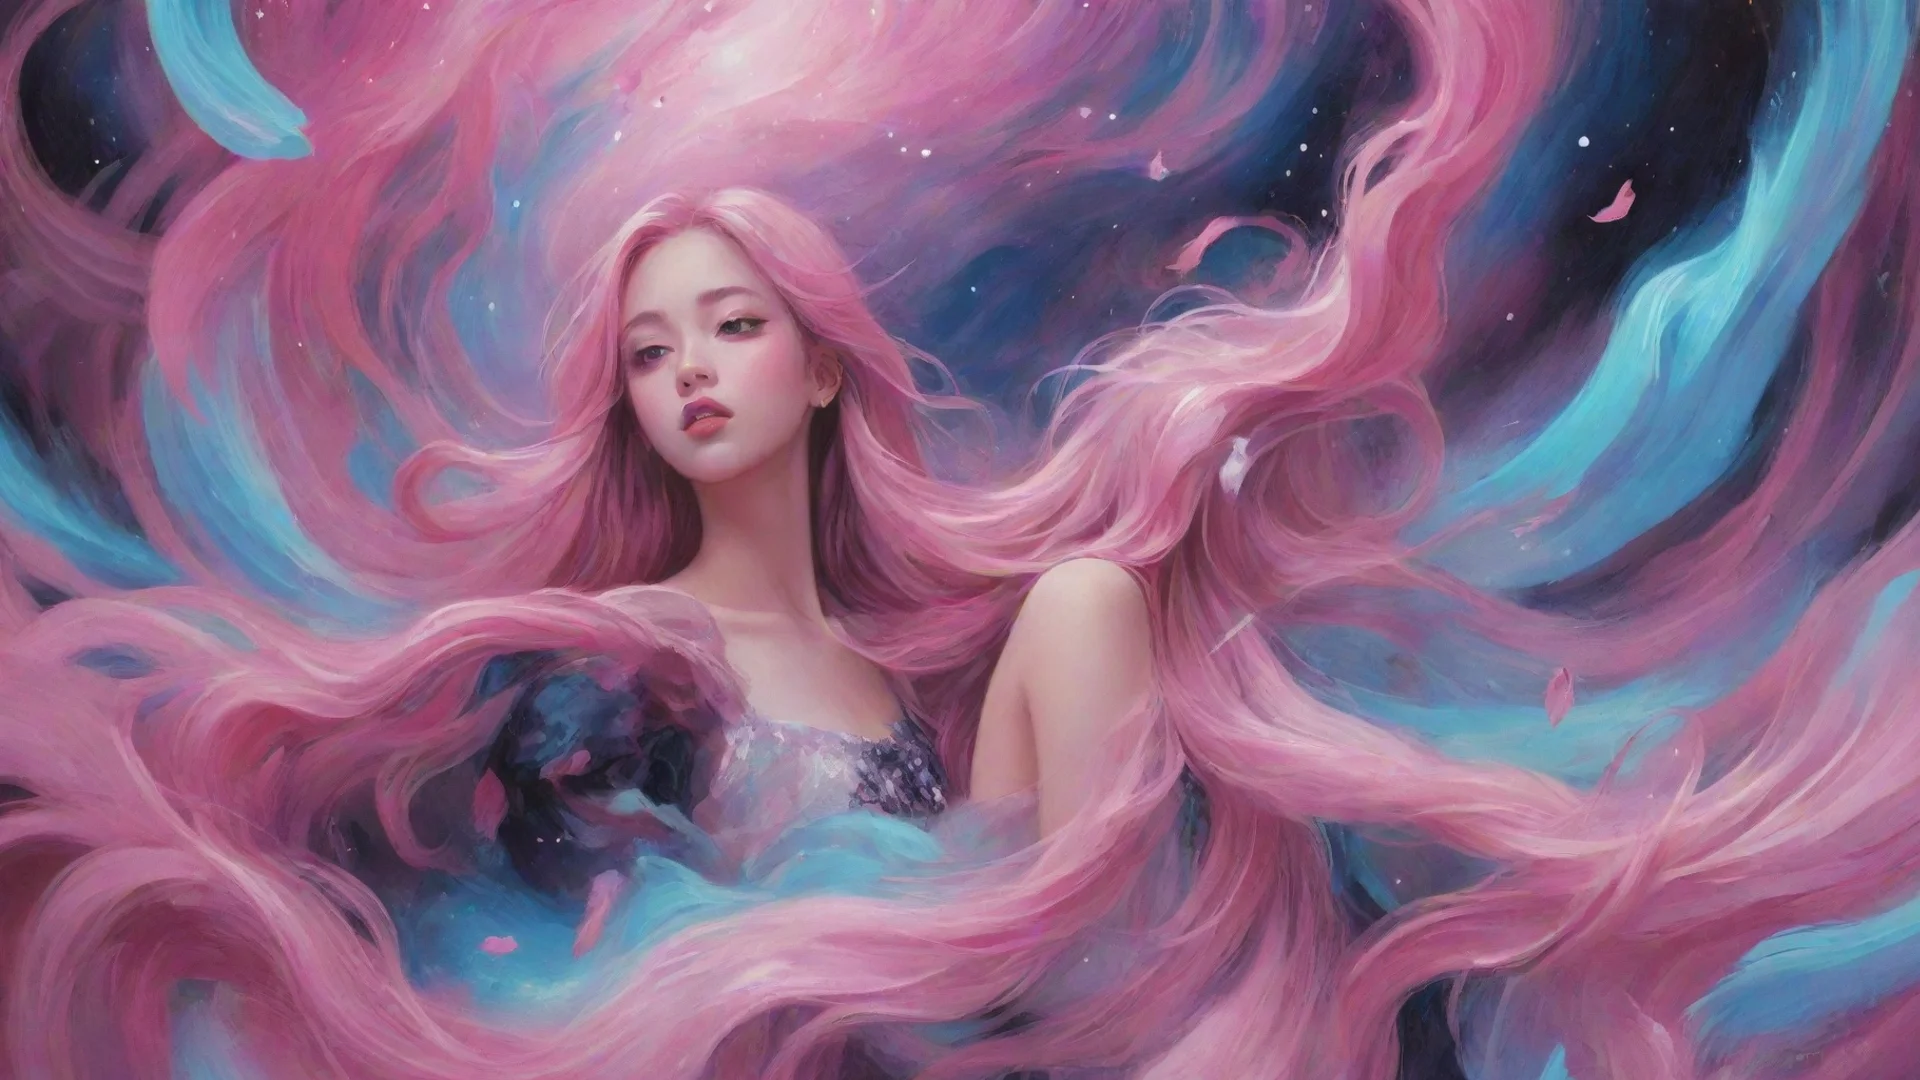 amazing beautifully detailed blackpink abstract wonderland fantasy aurora best quality awesome portrait 2 wide